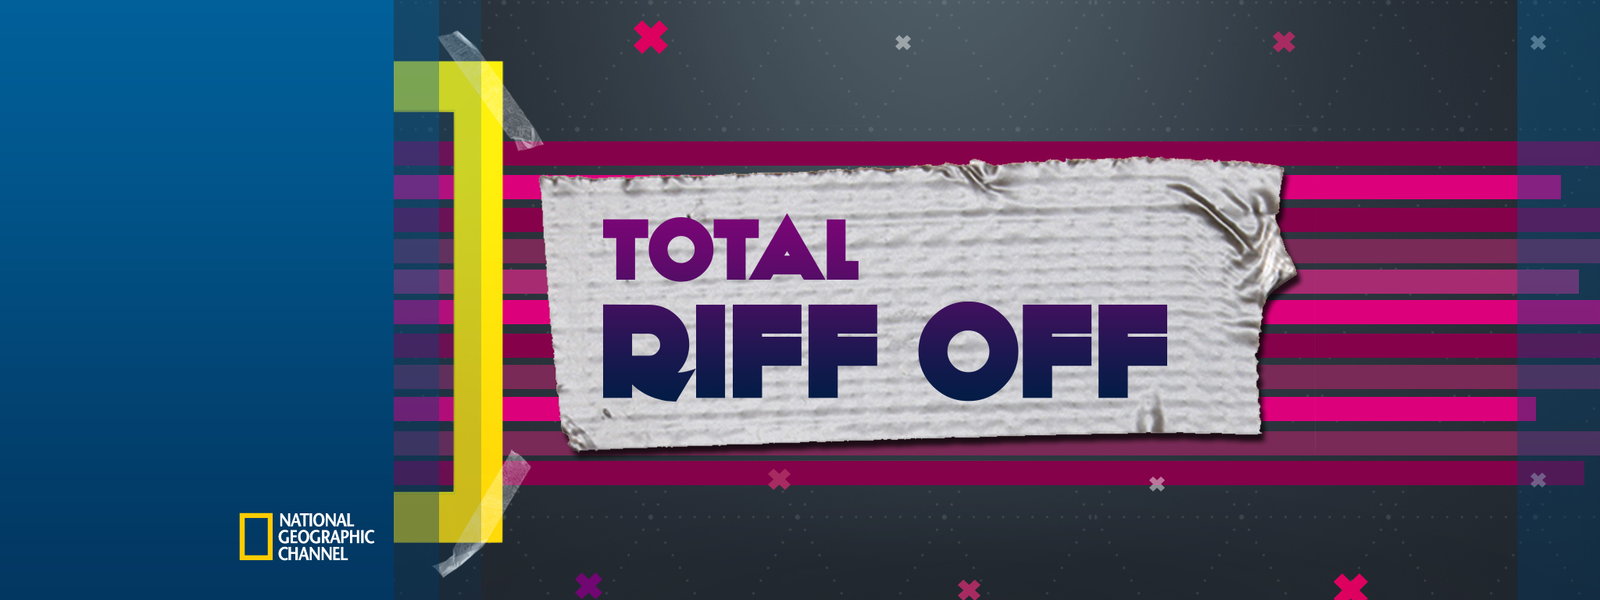 Total Riff Off: RiffTrax returns to TV with more National Geographic Channel primetime specials